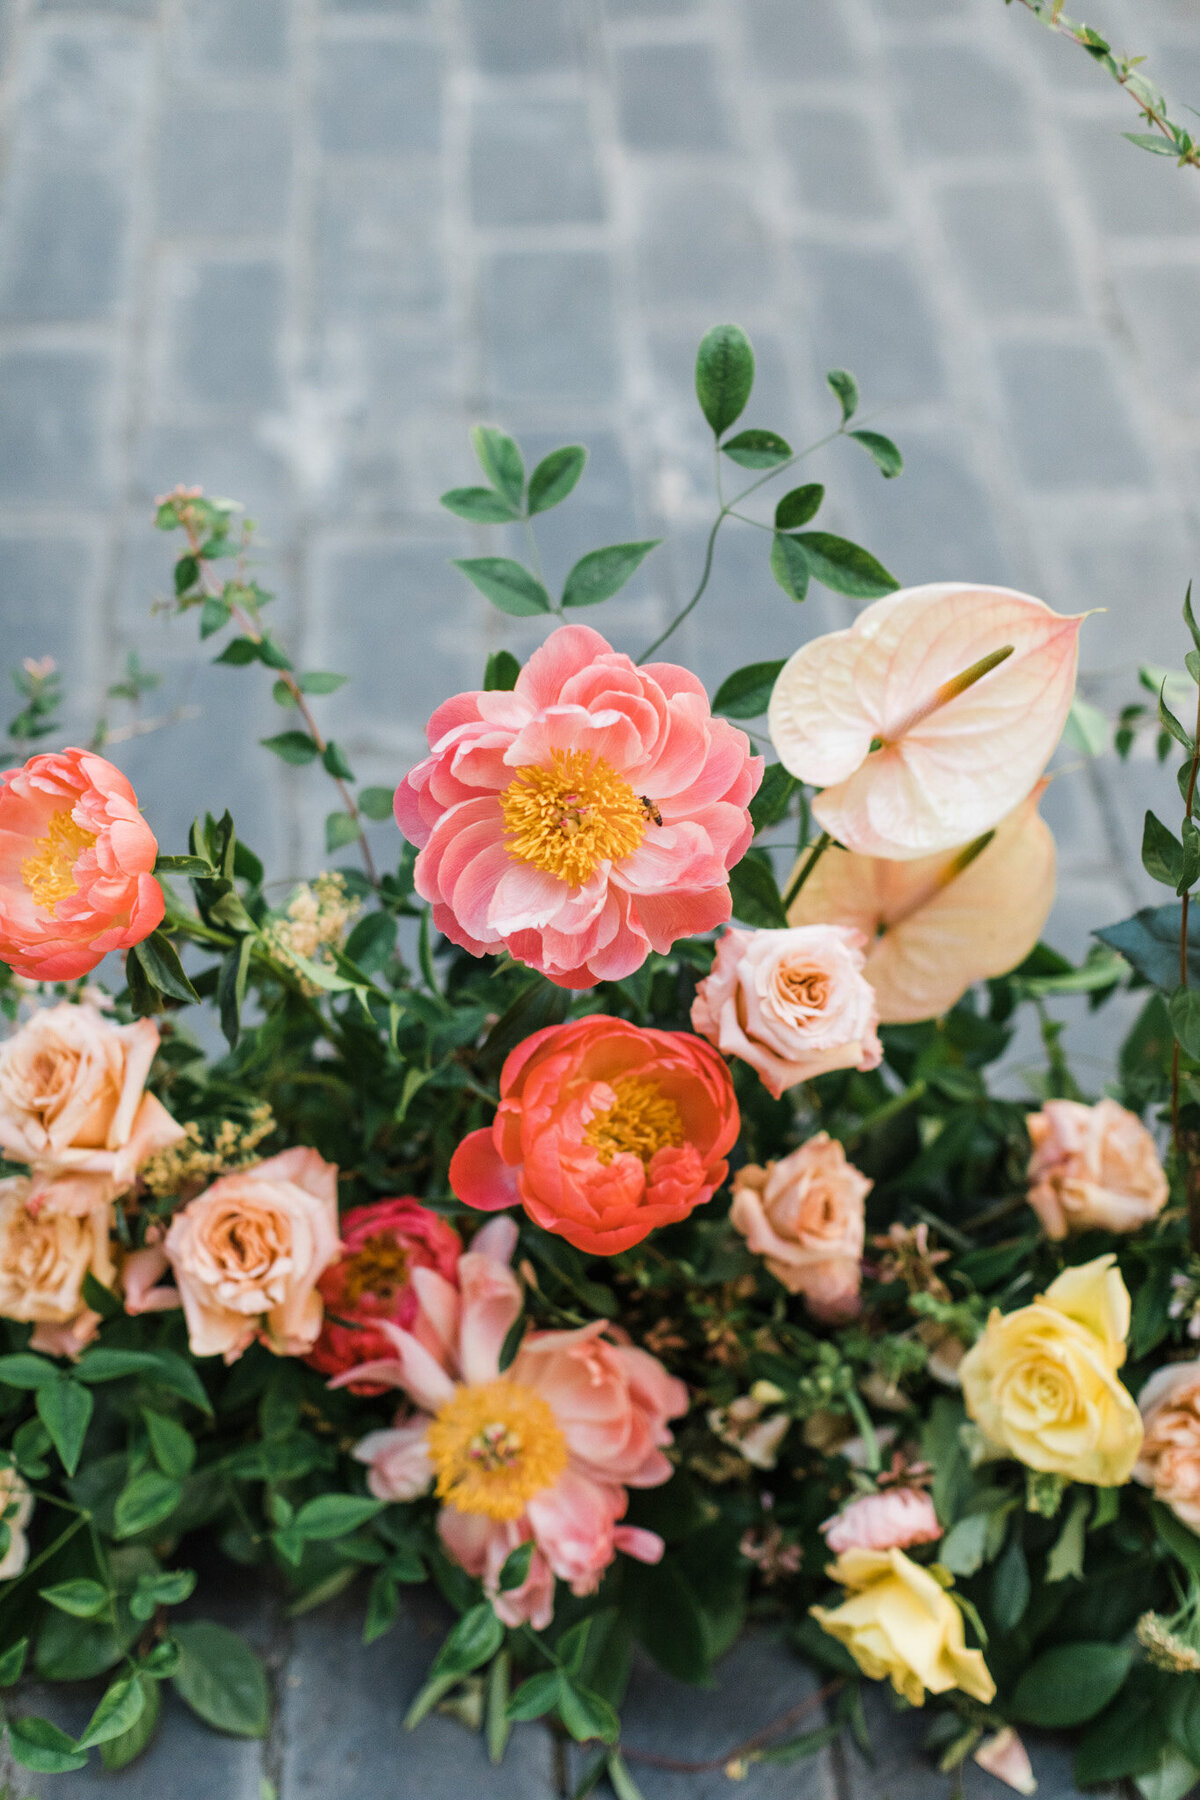 A detail shot of a floral arrangement for a wedding at the Hotel Crescent Court in Dallas, Texas. The floral arrangement is made up of many type of pink, orange, yellow, and red flowers and is resting on a brick floor.